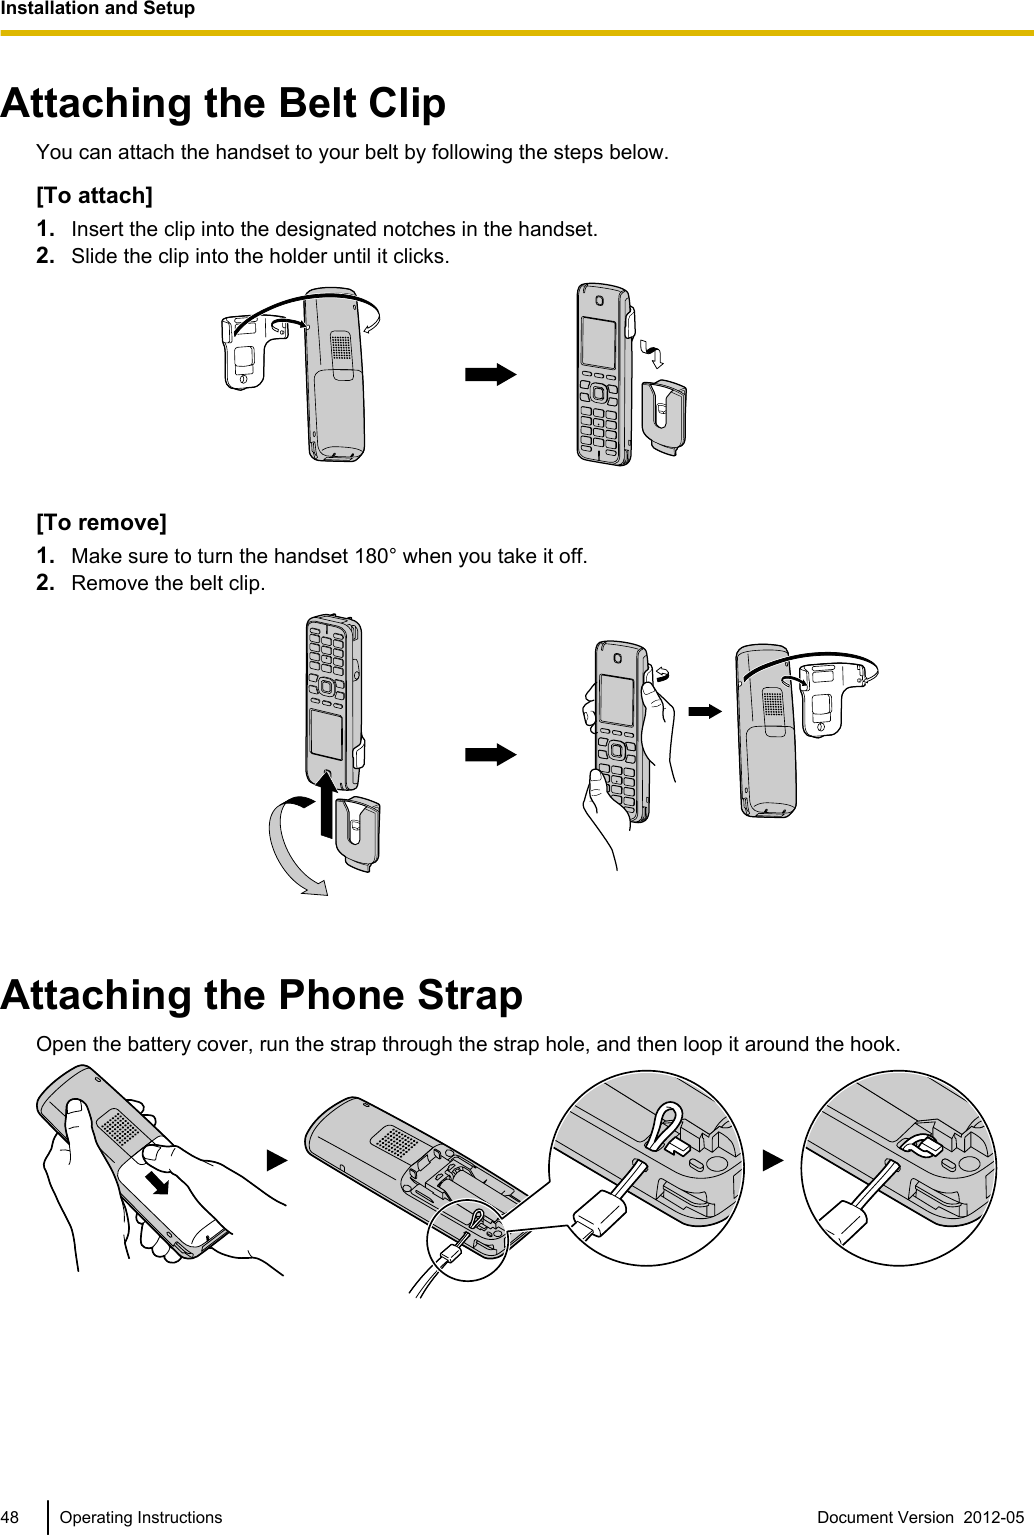 Attaching the Belt ClipYou can attach the handset to your belt by following the steps below.[To attach]1. Insert the clip into the designated notches in the handset.2. Slide the clip into the holder until it clicks.[To remove]1. Make sure to turn the handset 180° when you take it off.2. Remove the belt clip.Attaching the Phone StrapOpen the battery cover, run the strap through the strap hole, and then loop it around the hook.48 Operating Instructions Document Version  2012-05  Installation and Setup